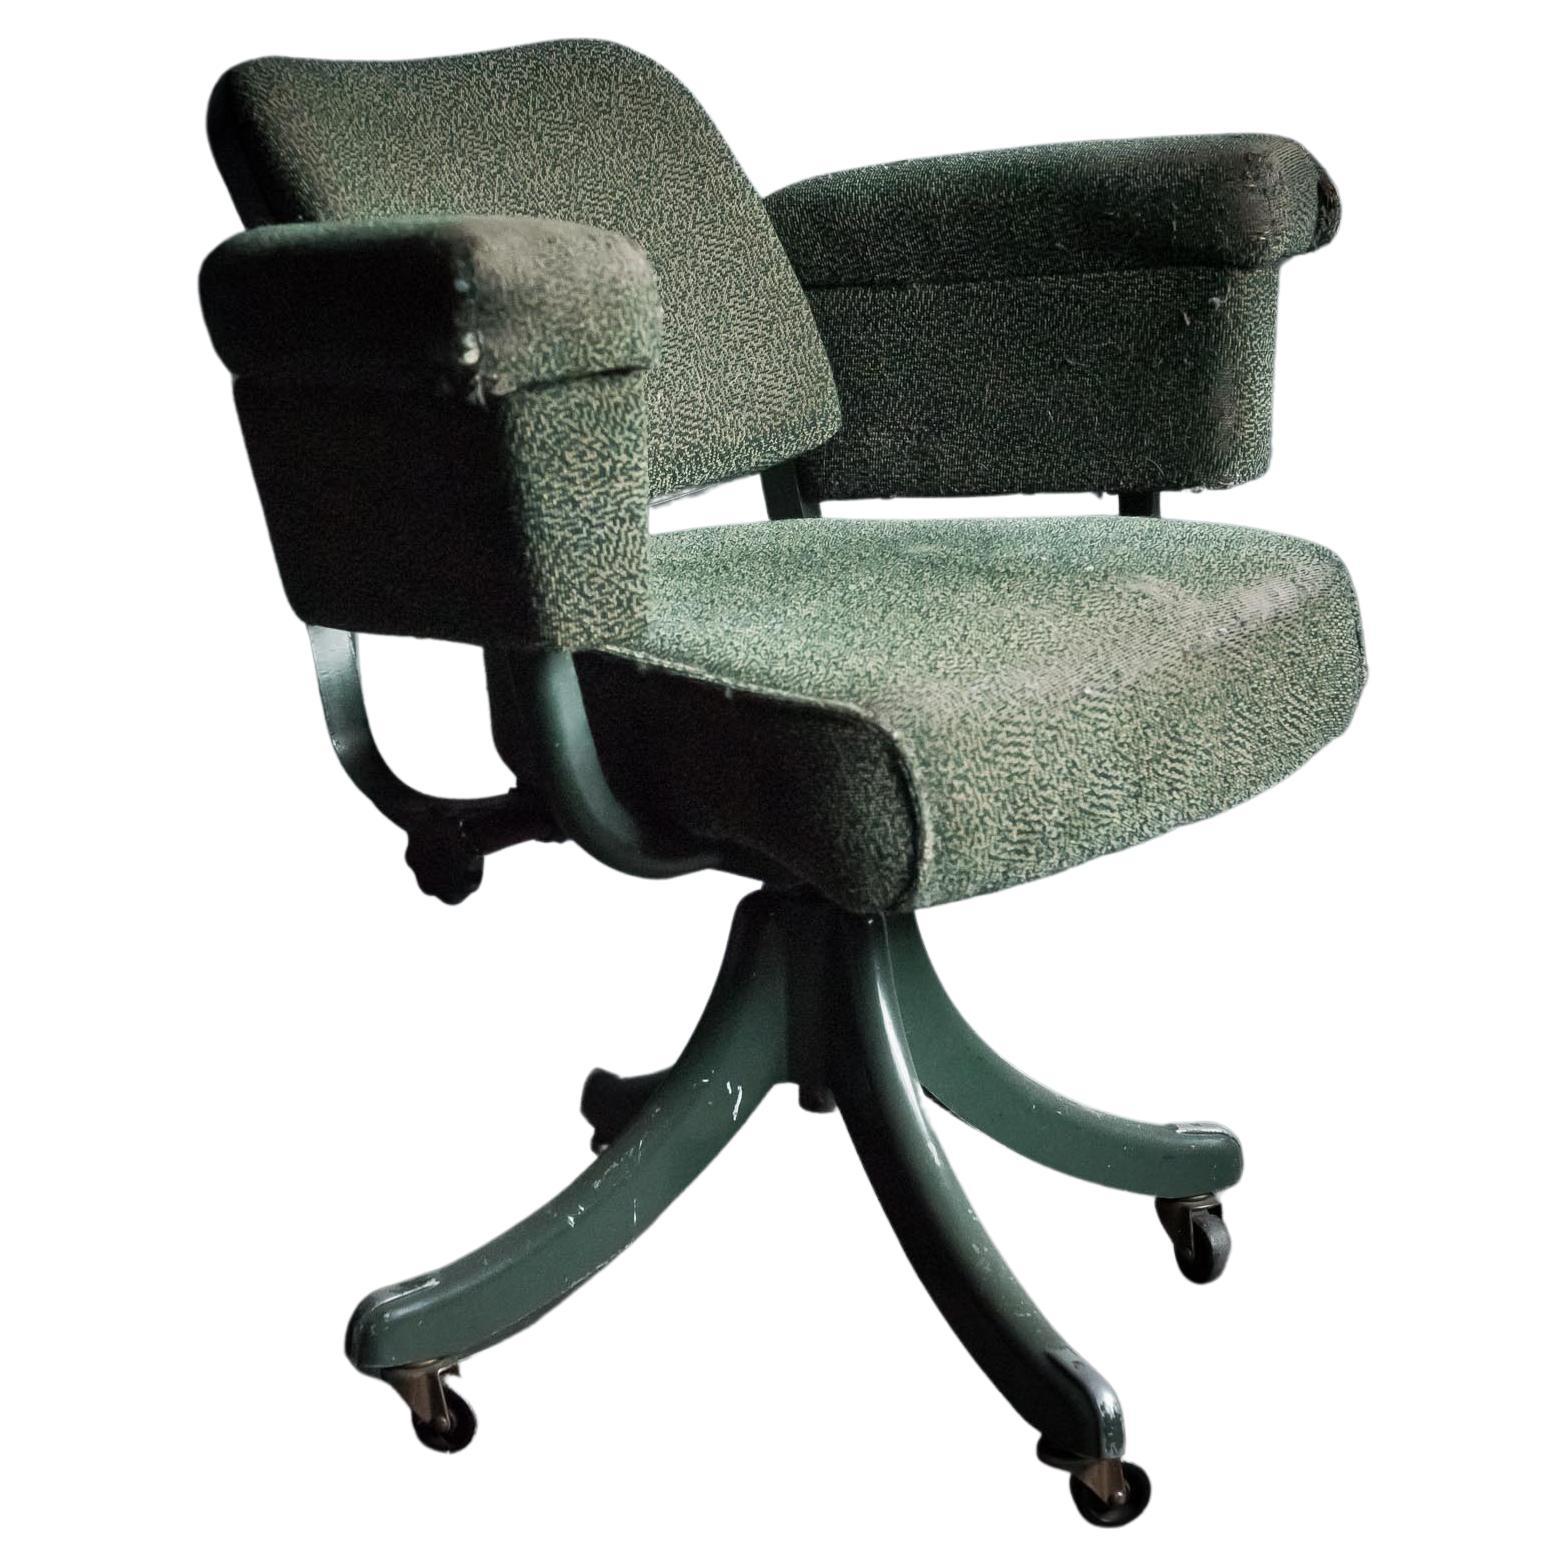 Tansad Office Chair in Original Green Boucle Upholstery